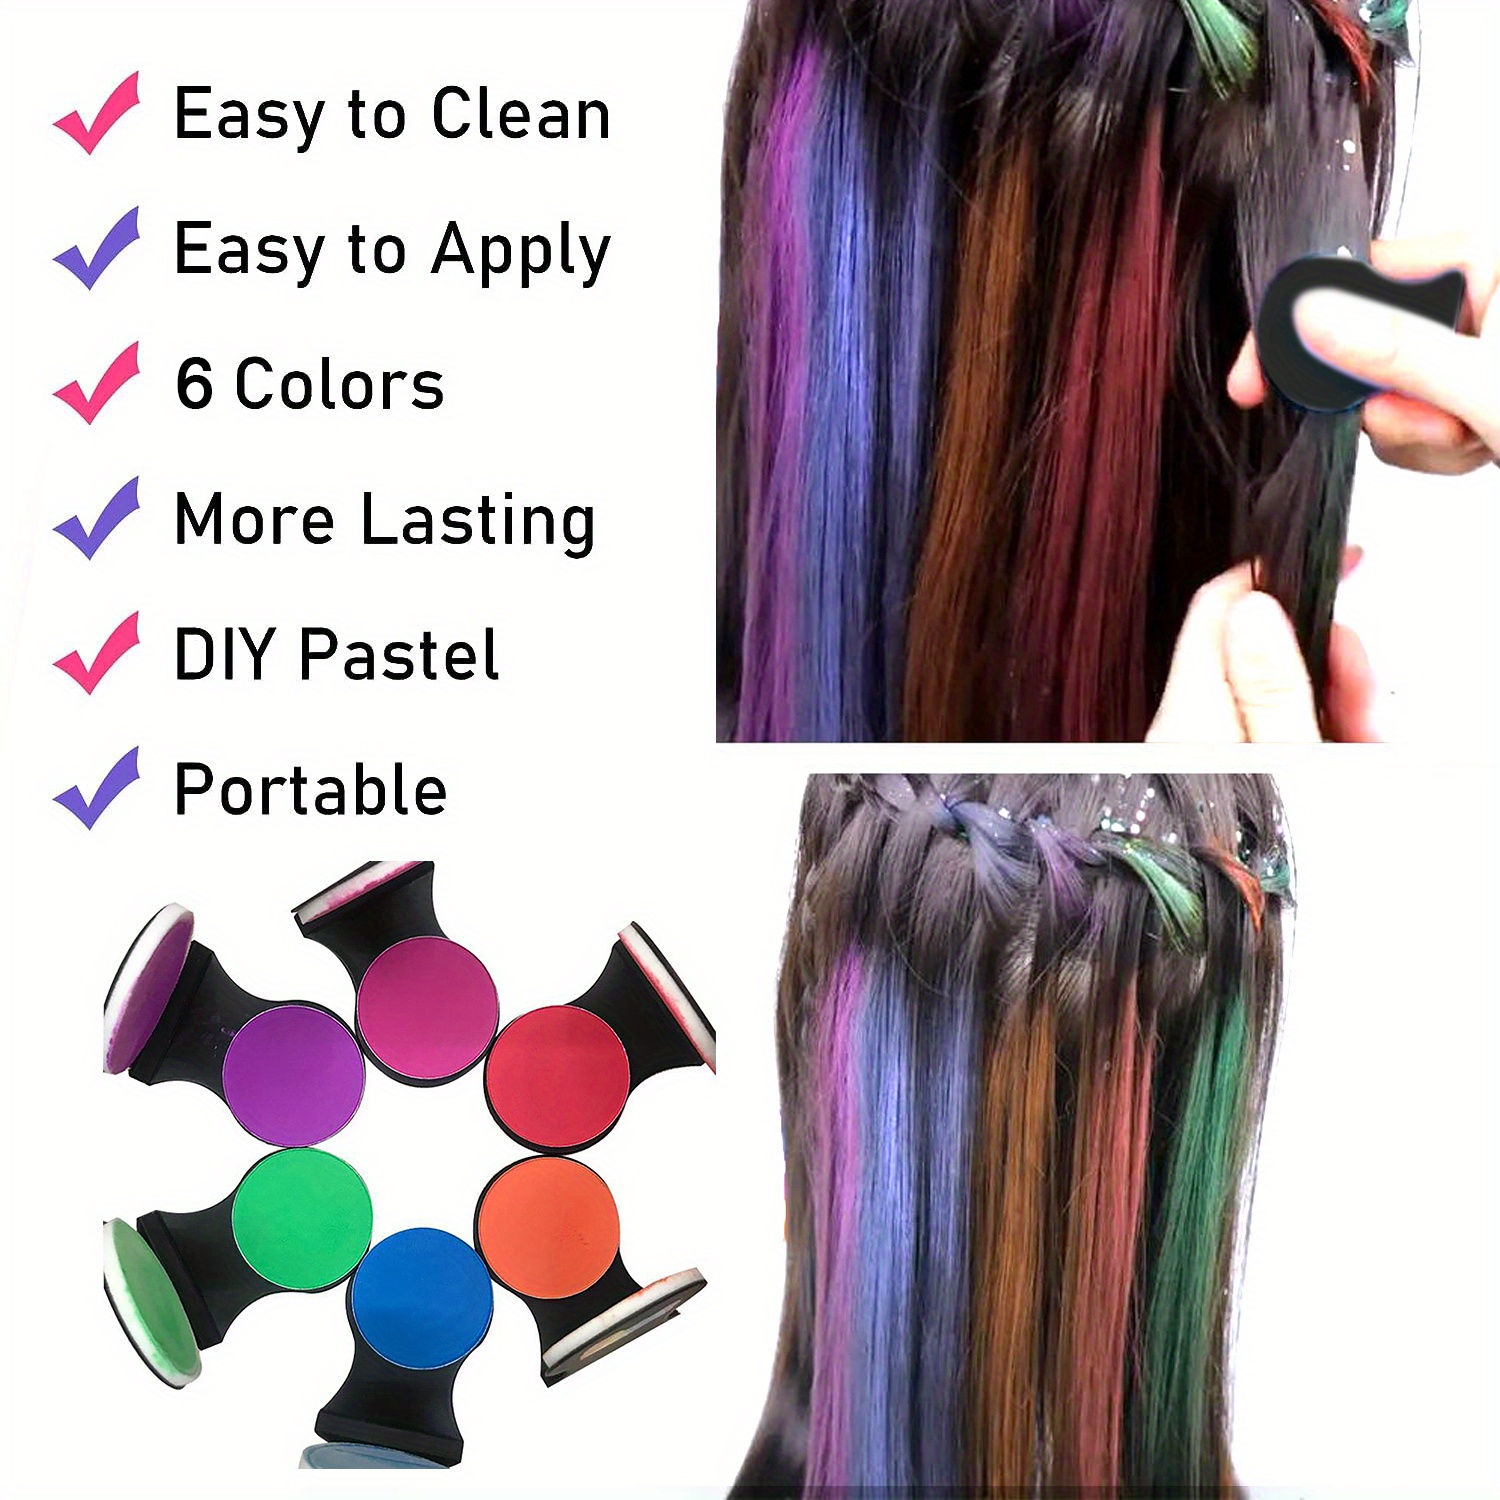 Hair Chalk,12 Color Hair Chalk Paint,Hair Chalk Set,Temporary Washable Hair  Color Dye for Kids,Non-Stick & Vibrant,New Year Birthday Party Cosplay DIY  Children's Day,Halloween,Christmas 8 colors